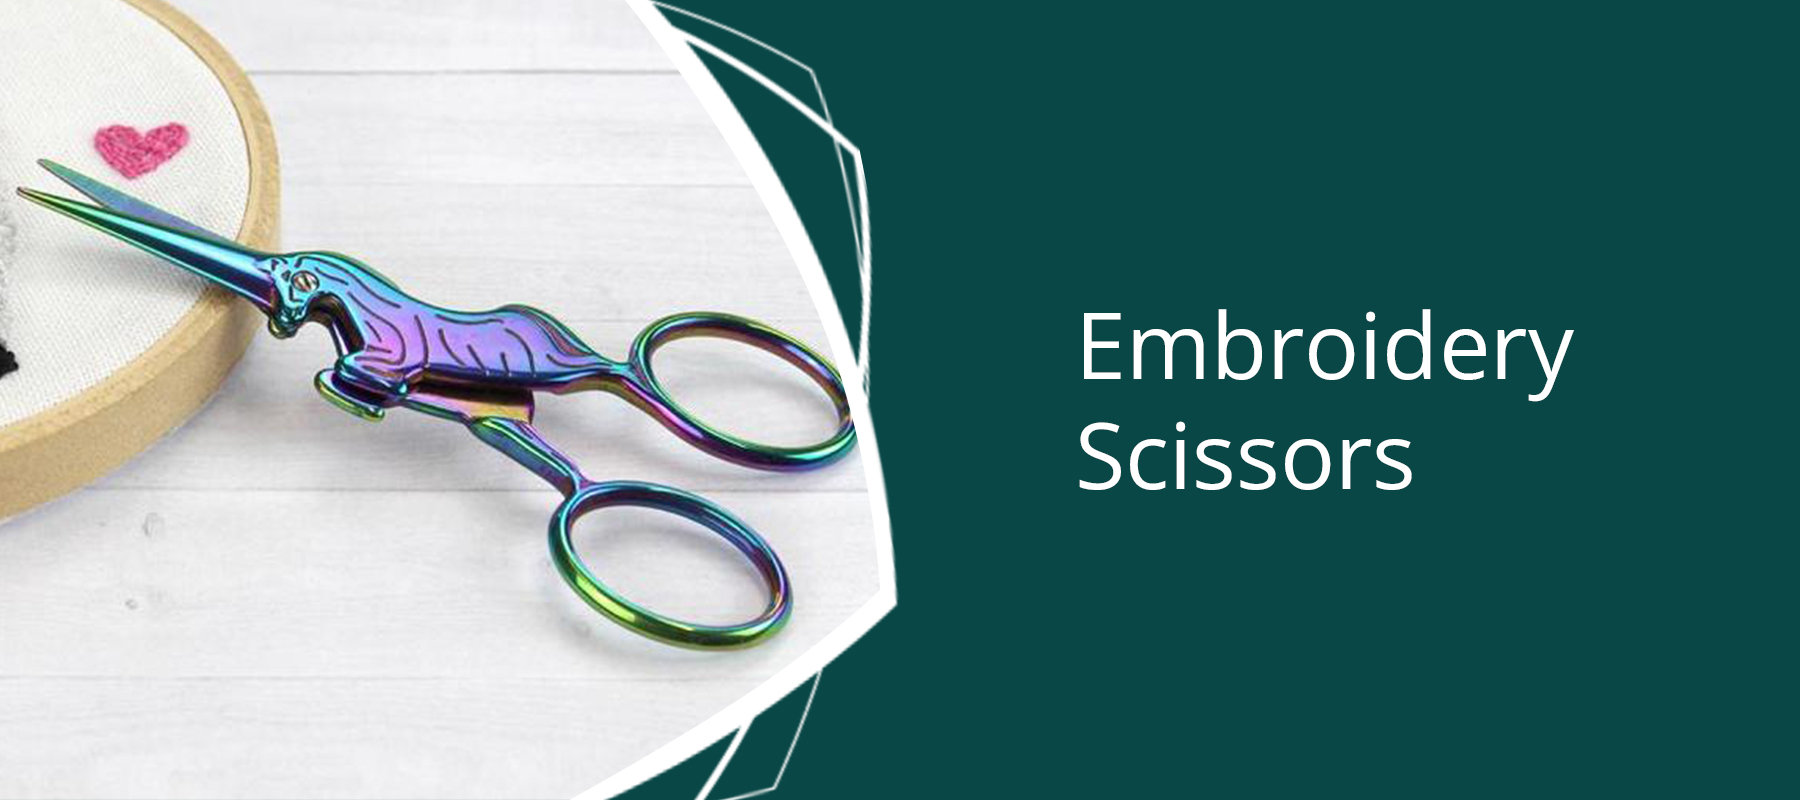 Embroidery Scissors: Quality Tools for Your Needlework